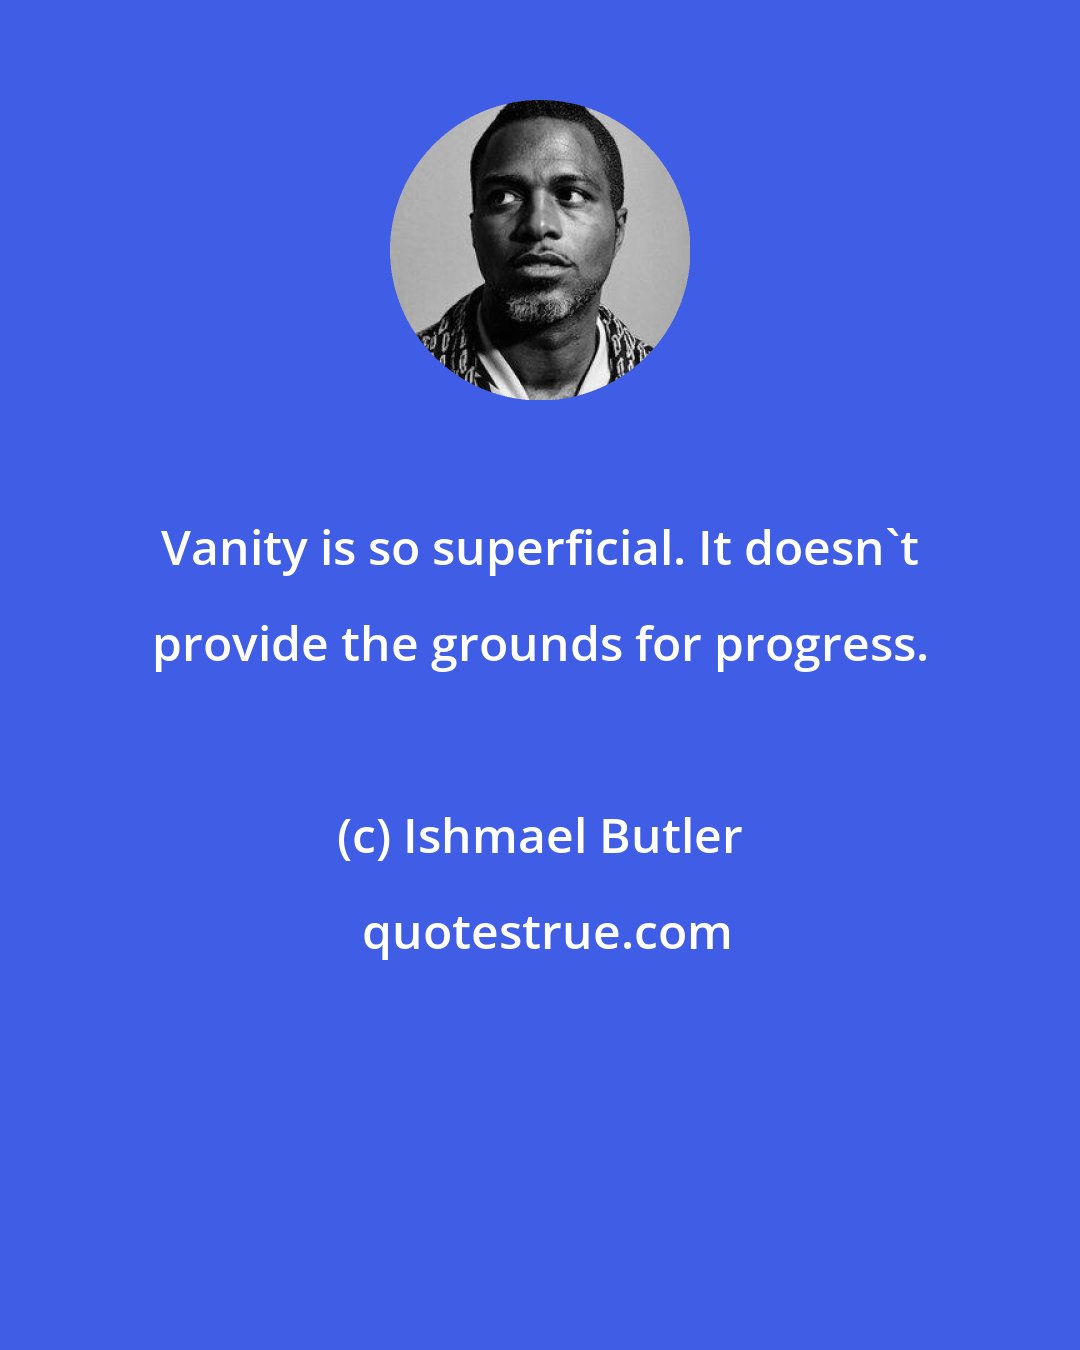 Ishmael Butler: Vanity is so superficial. It doesn't provide the grounds for progress.